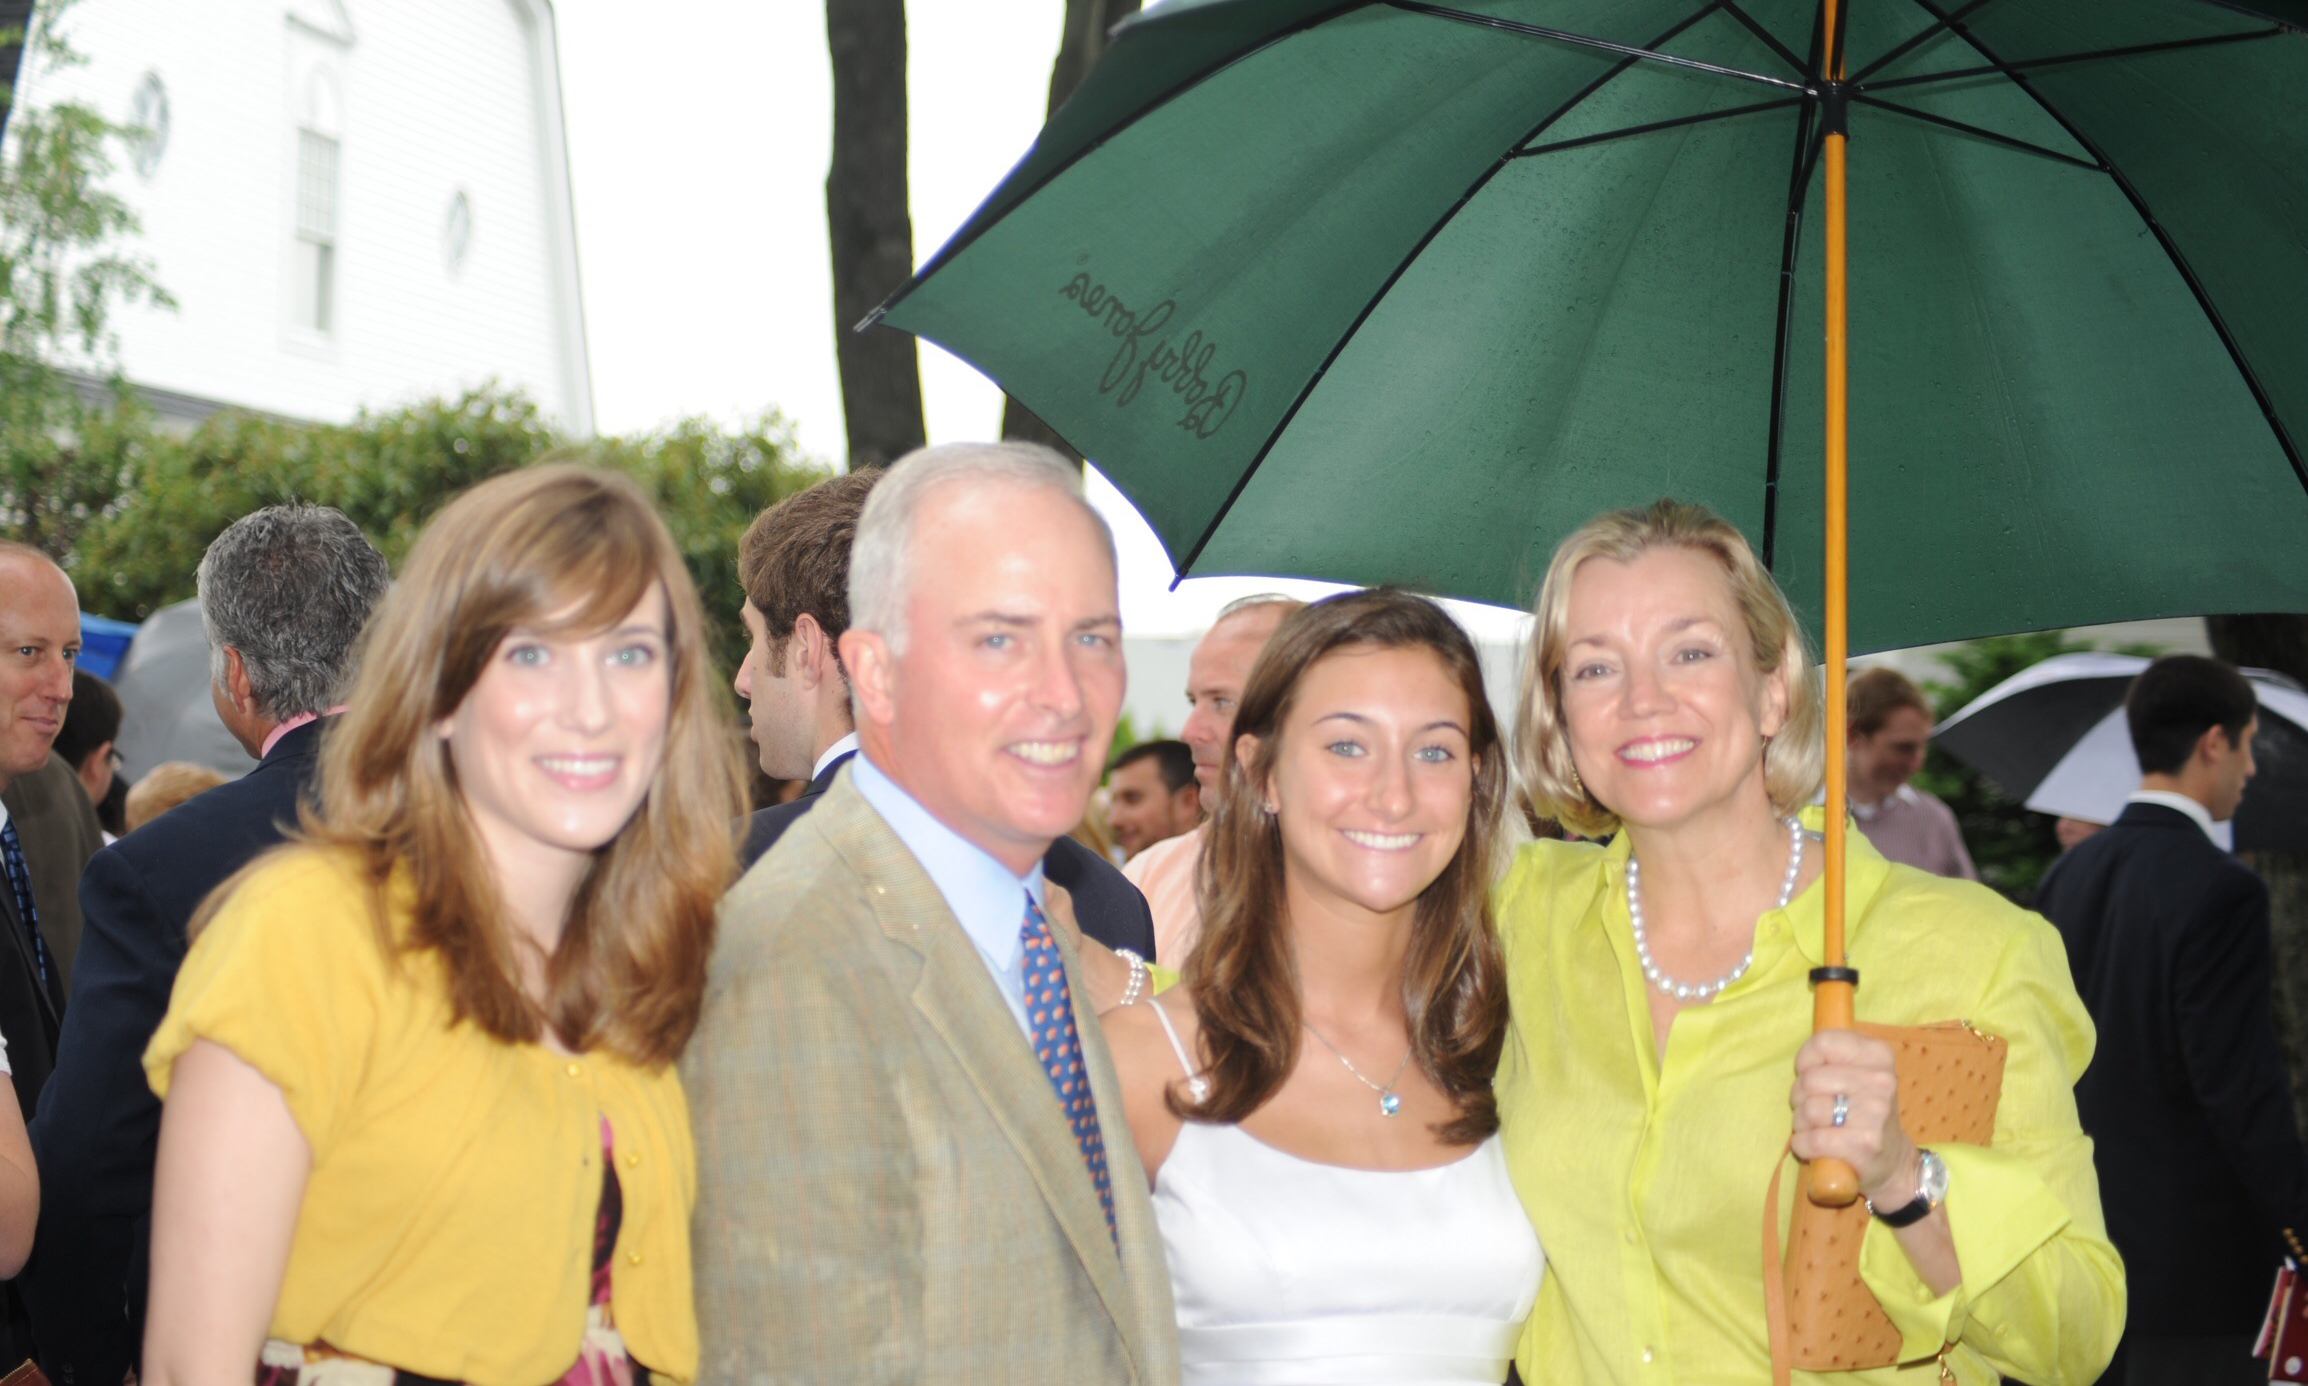 From left: Meredith, Bob, Madeline, and Cindy McCann. (Photo courtesy McCann family)